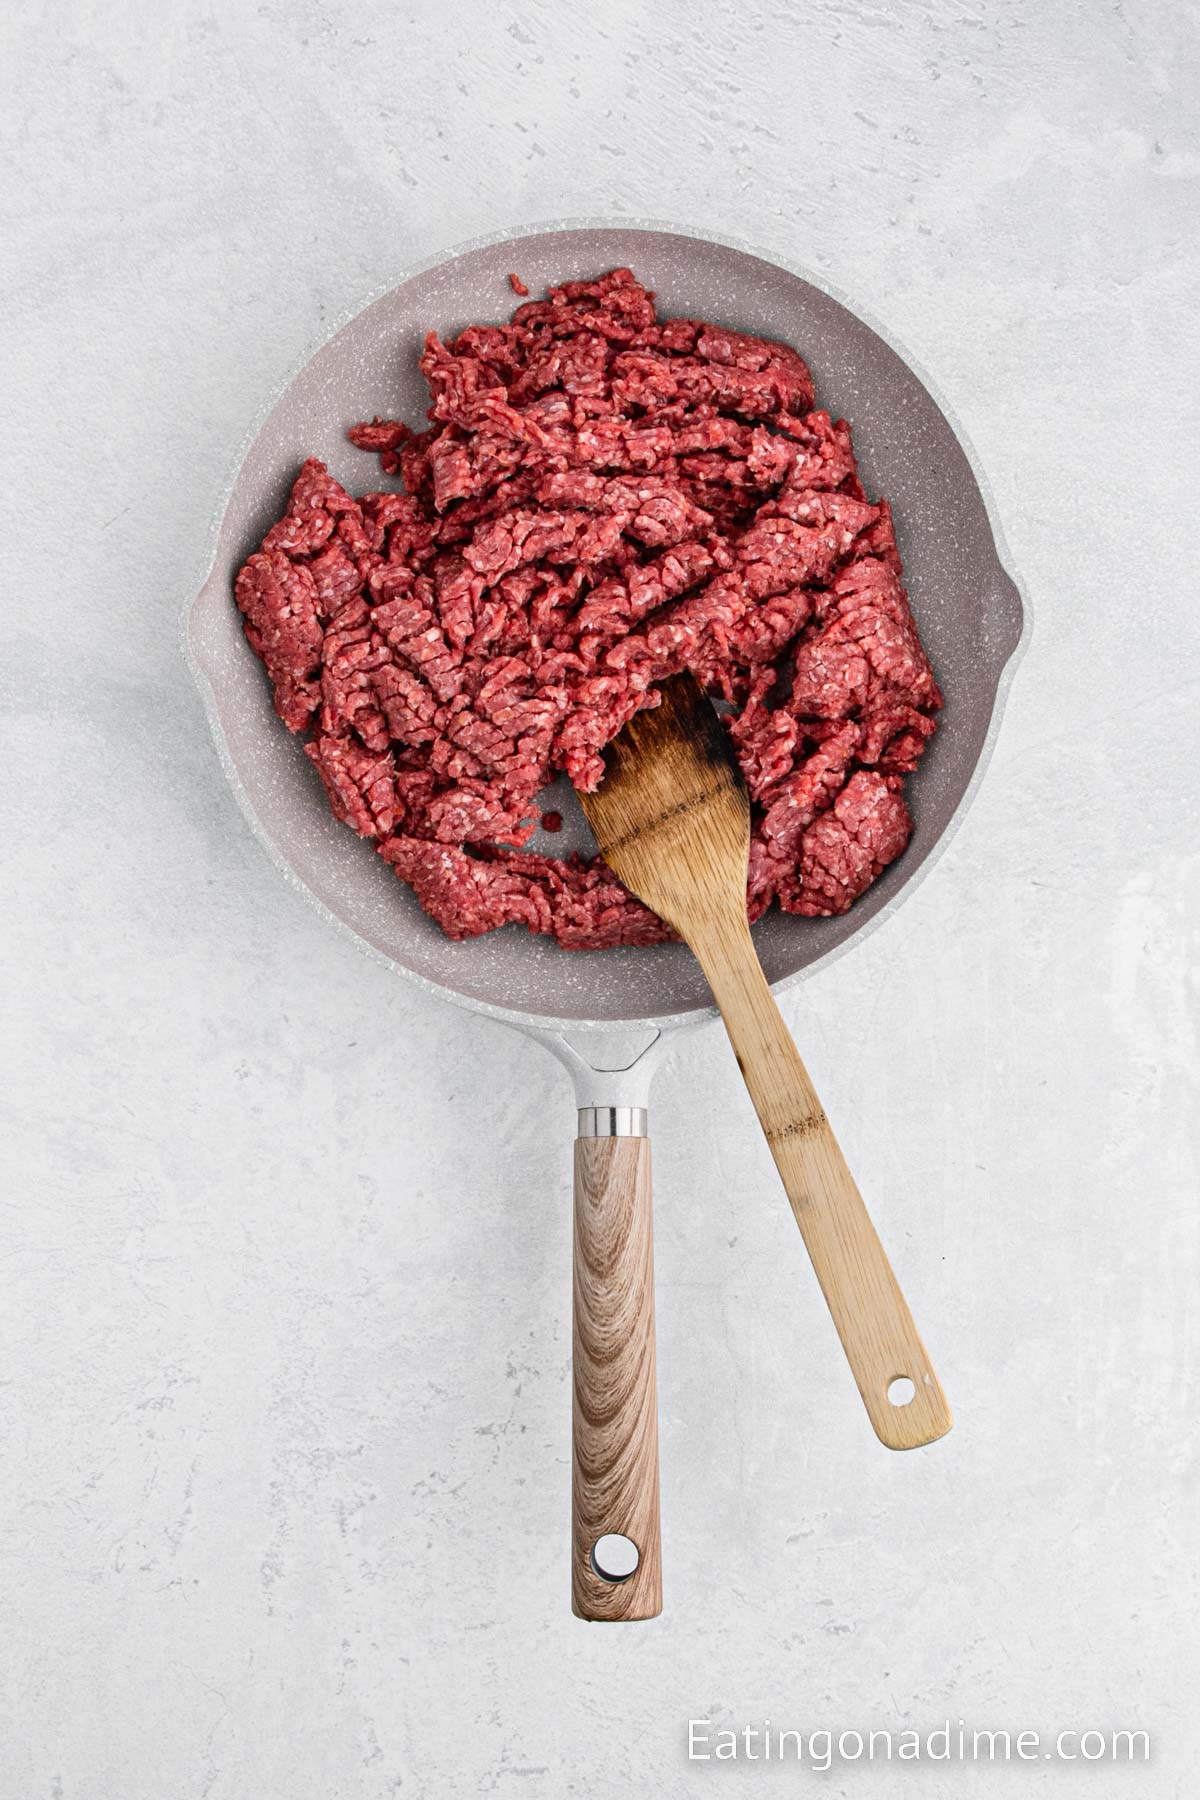 Cooking the ground beef in the skillet with a wooden spoon